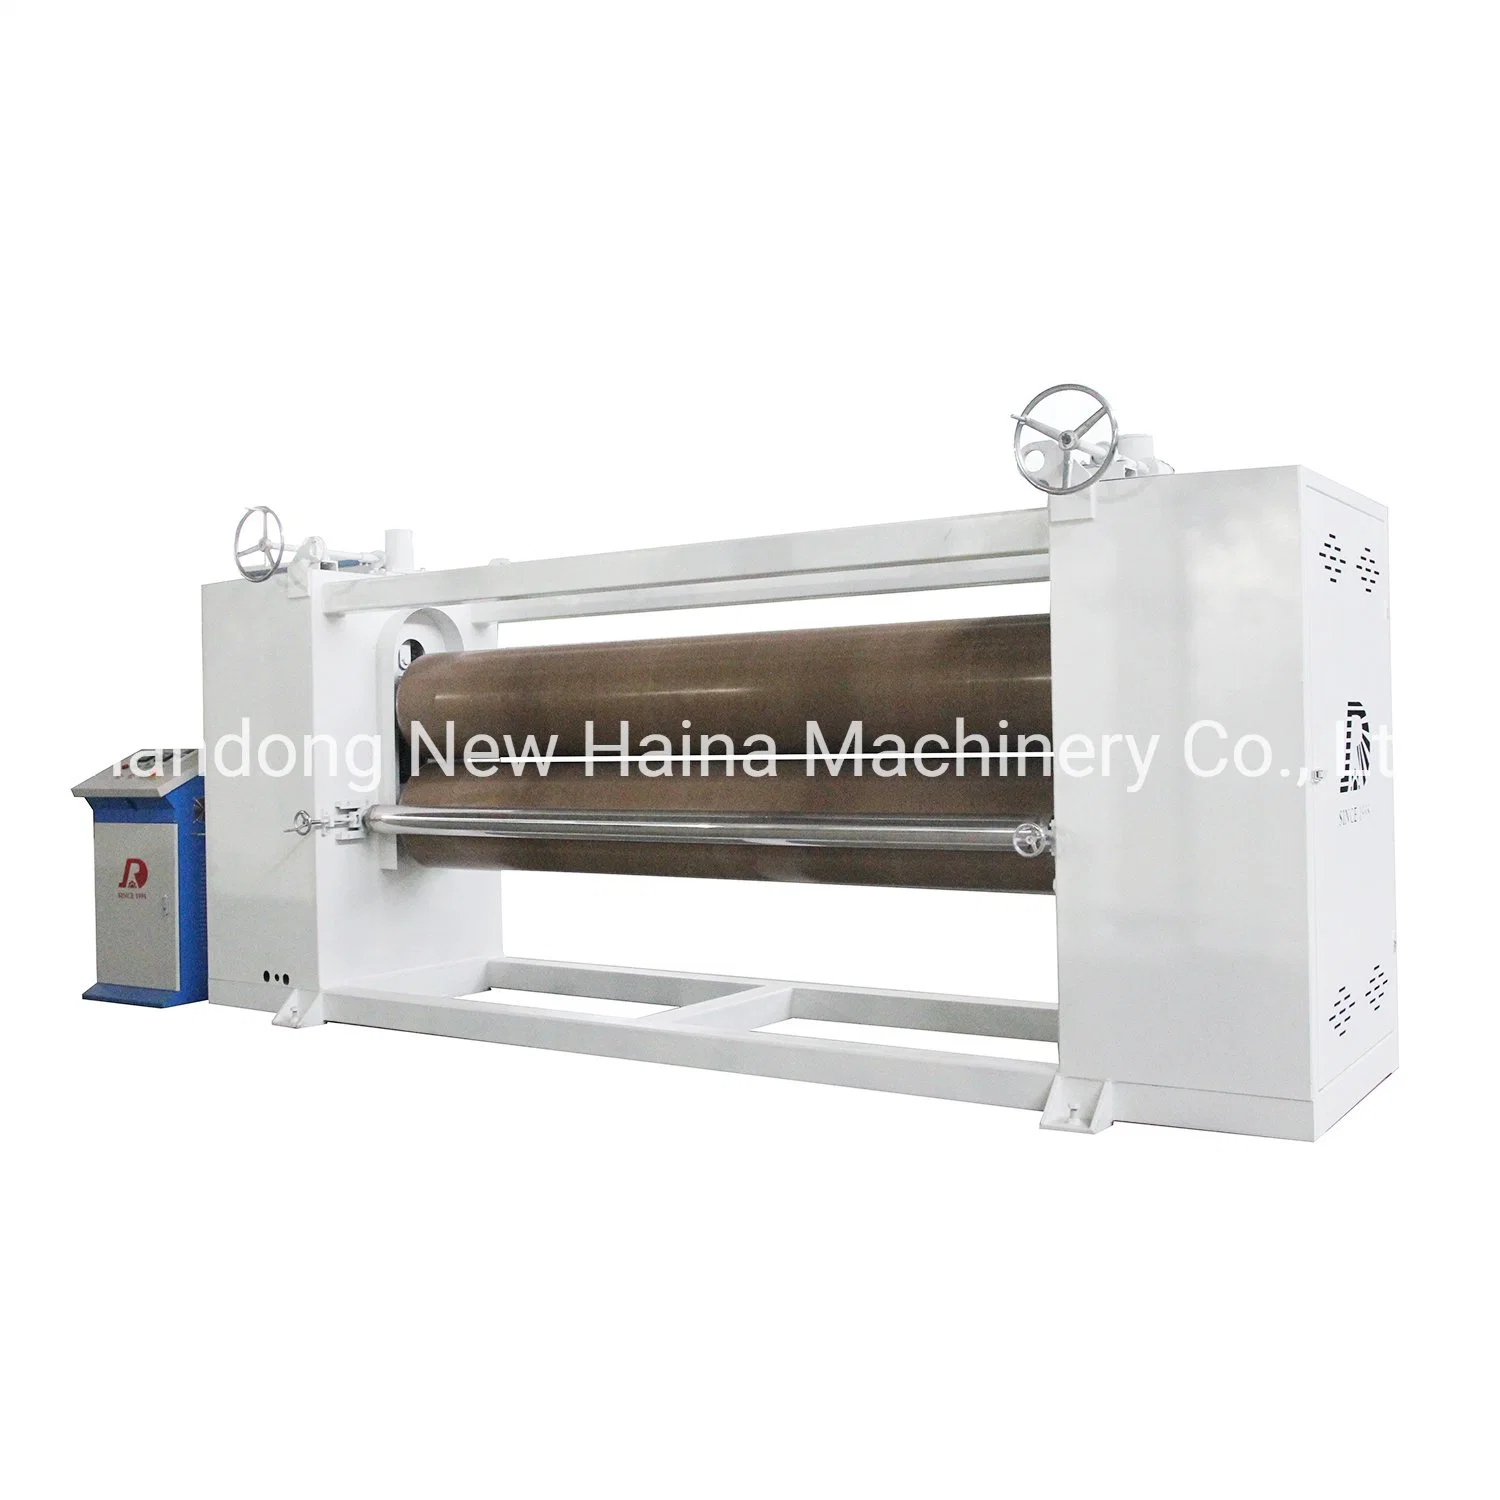 Non-Woven Felt Blanket Production Machine Ironing Machine for Product Surface Hardness and Smoothness Calender